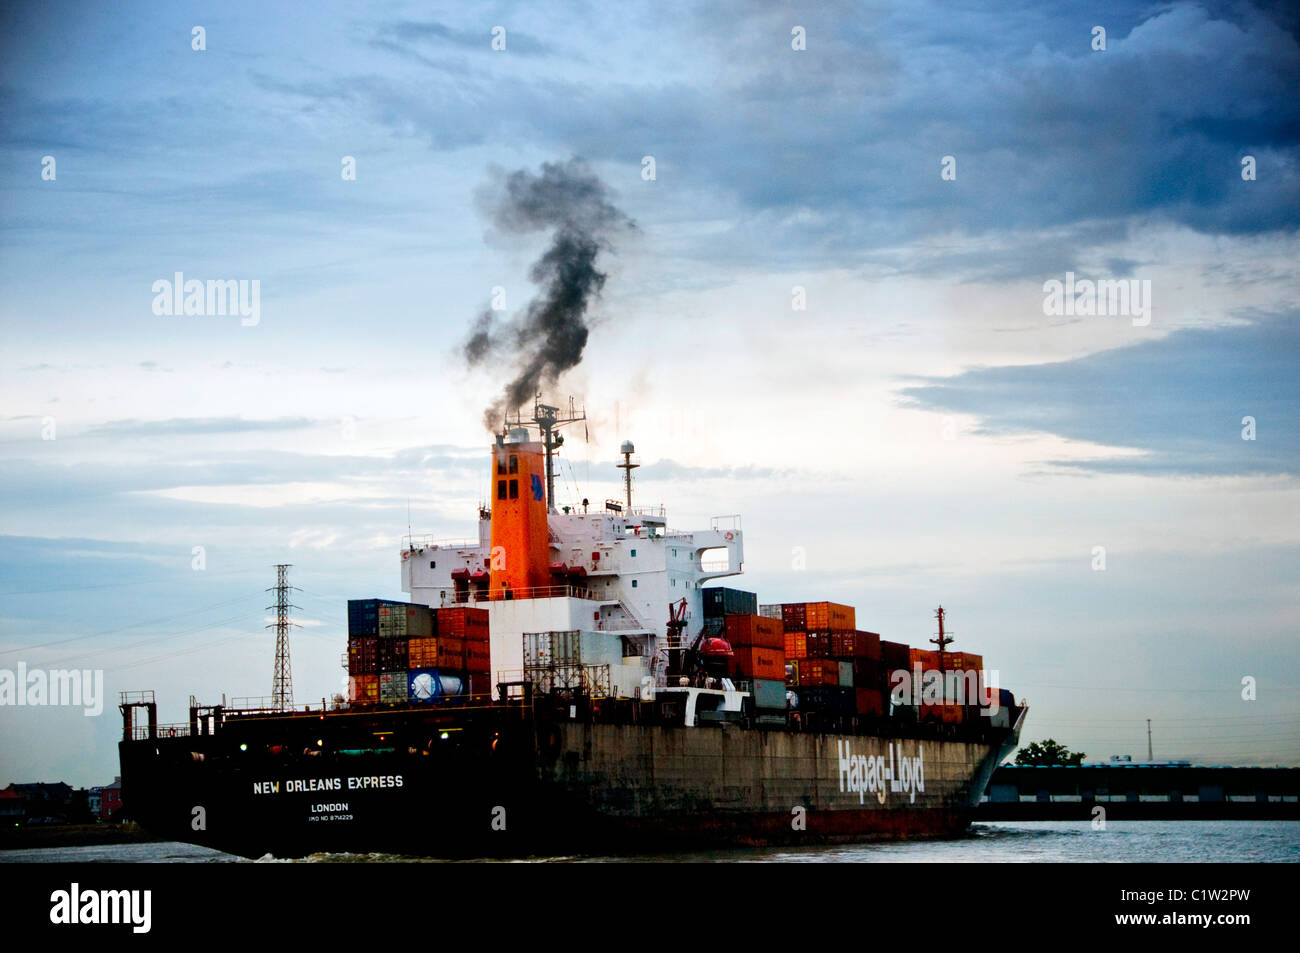 Ship in a river, Mississippi River, New Orleans, Louisiana, USA Stock Photo